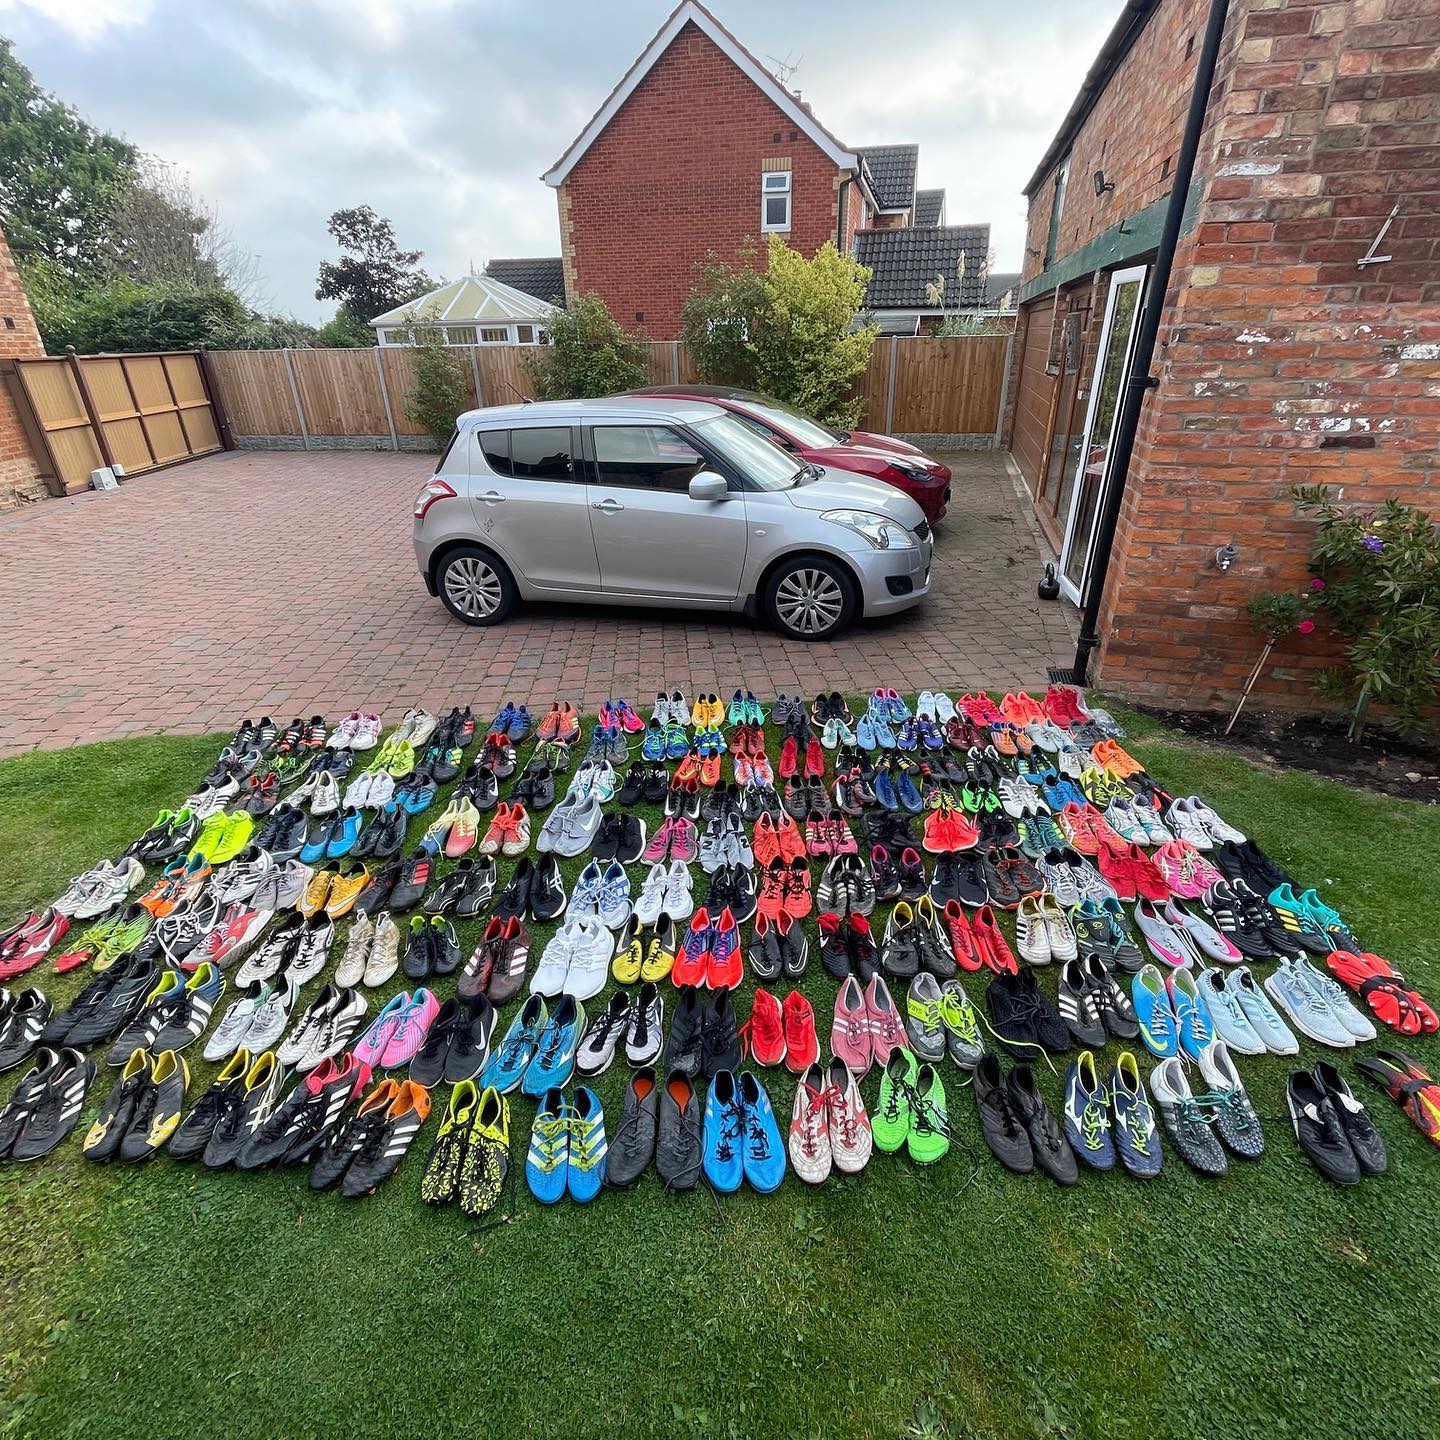 The 162 pairs of rugby boots transported by HAE Group